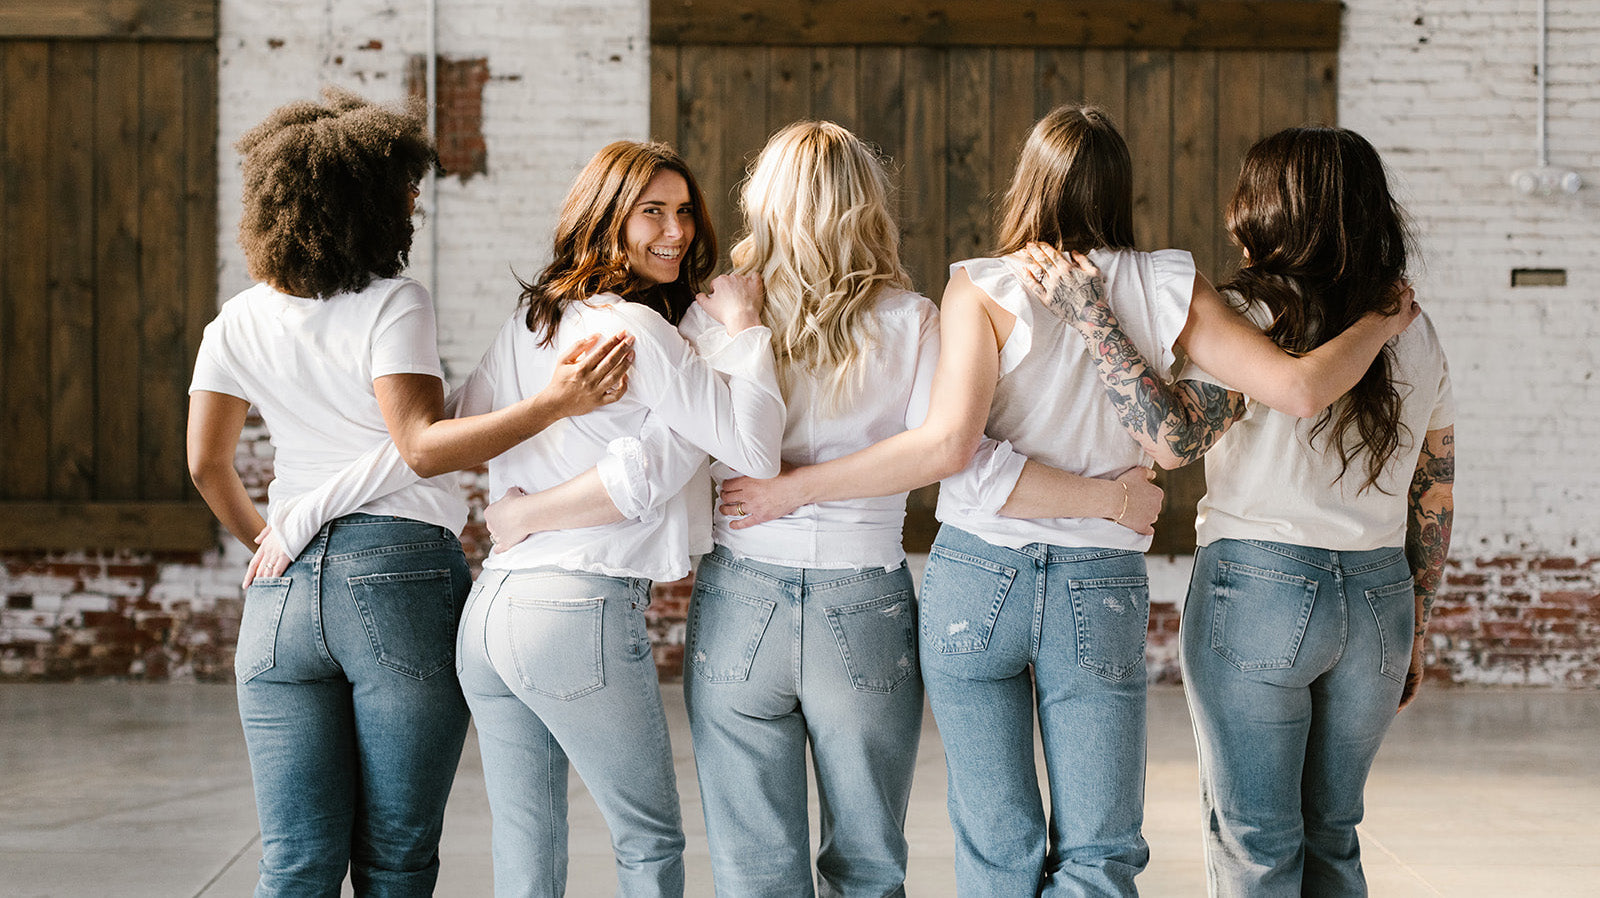 Five women in white tops and blue jeans standing together, one facing the camera while the others have their backs turned.